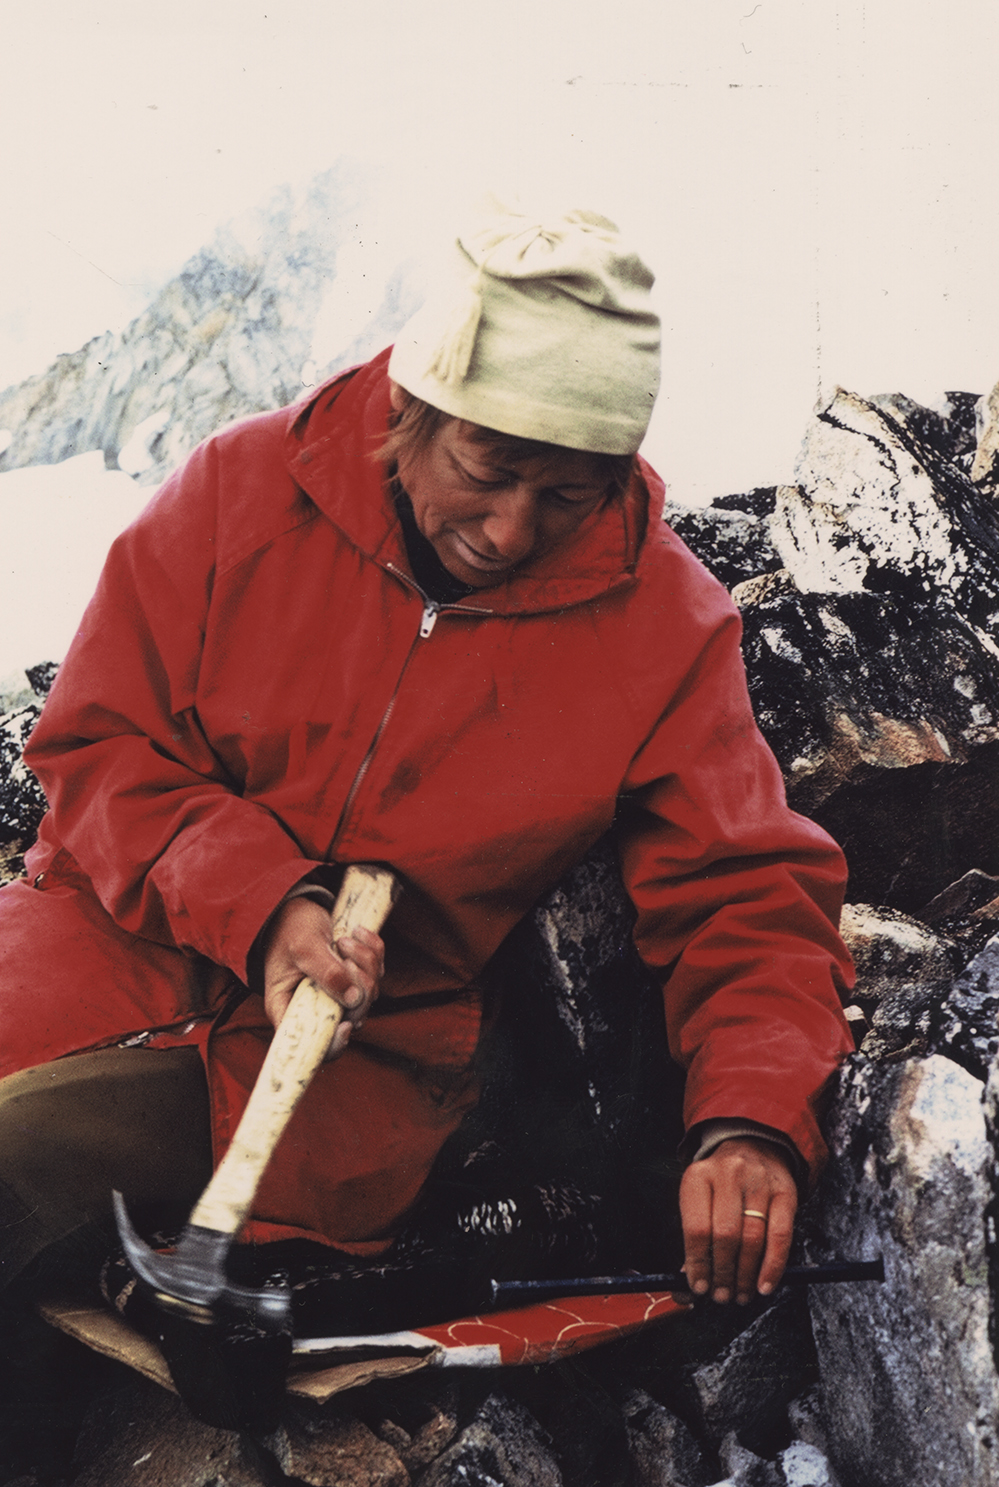 A woman in a red jacket and white toque sits leaned up against the rock while wielding a hammer and holding onto a long metal spike that is embedded in the bedrock.